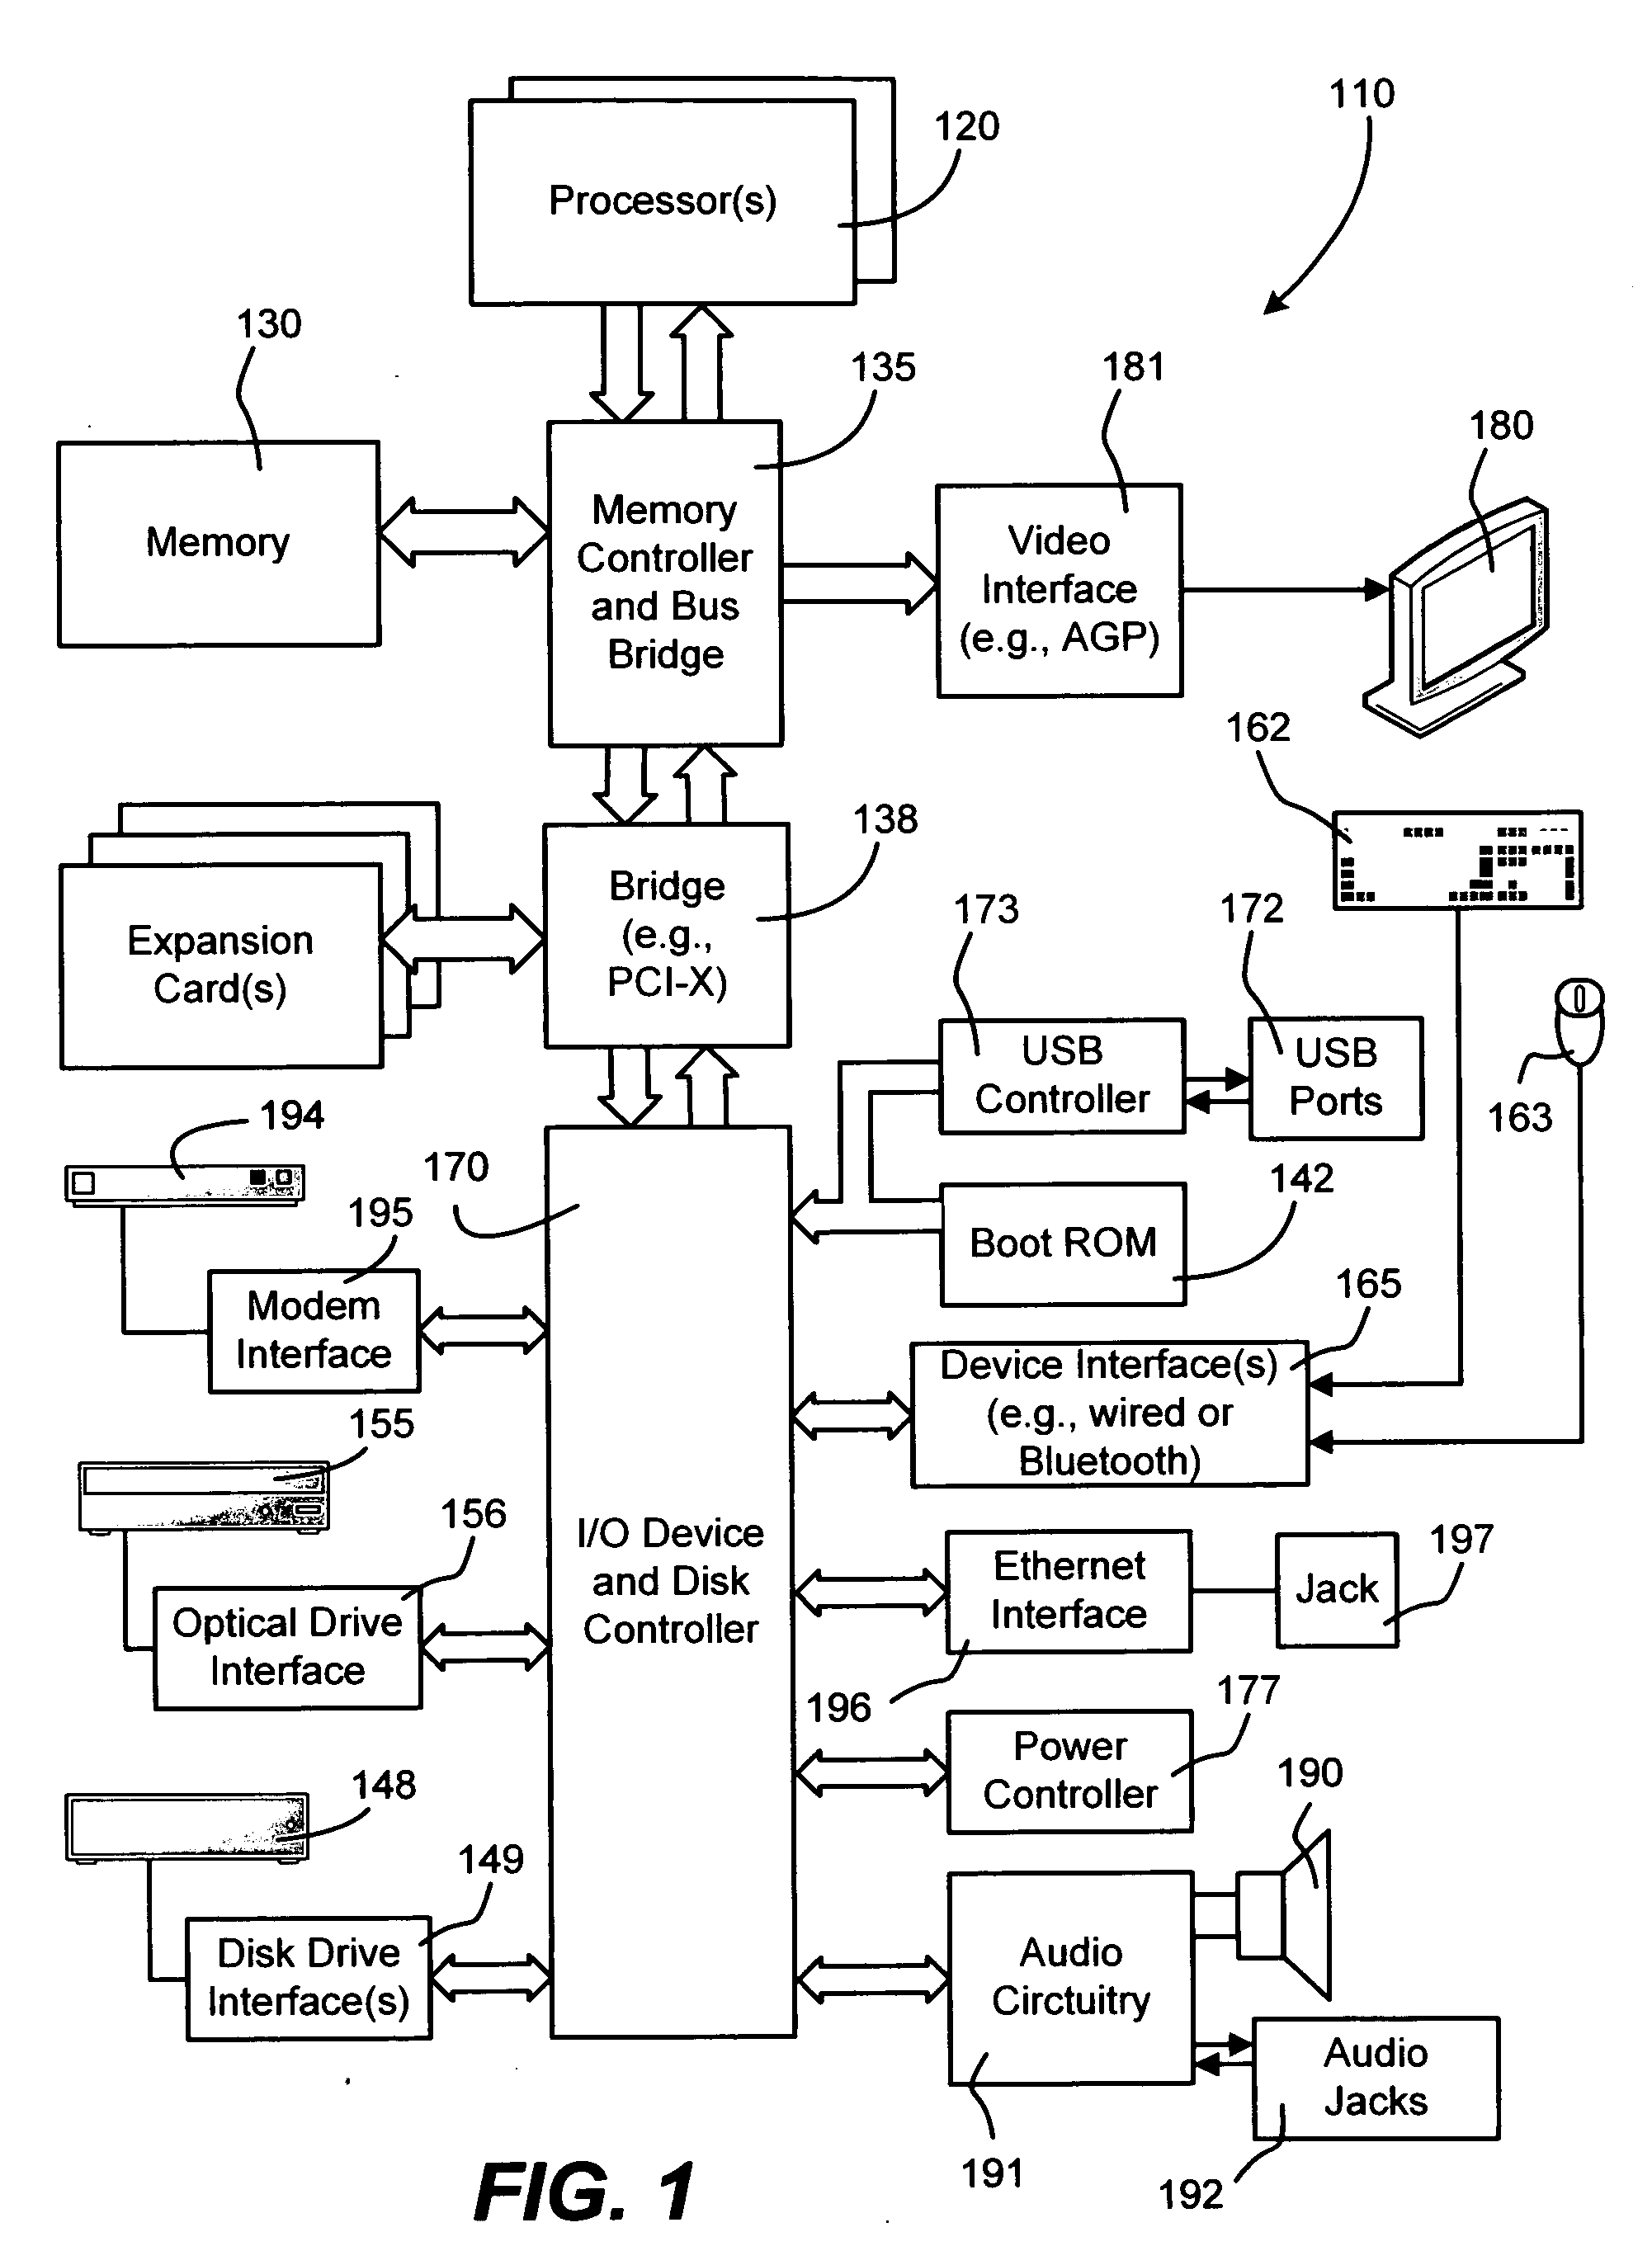 Method and system for persisting and managing computer program clippings